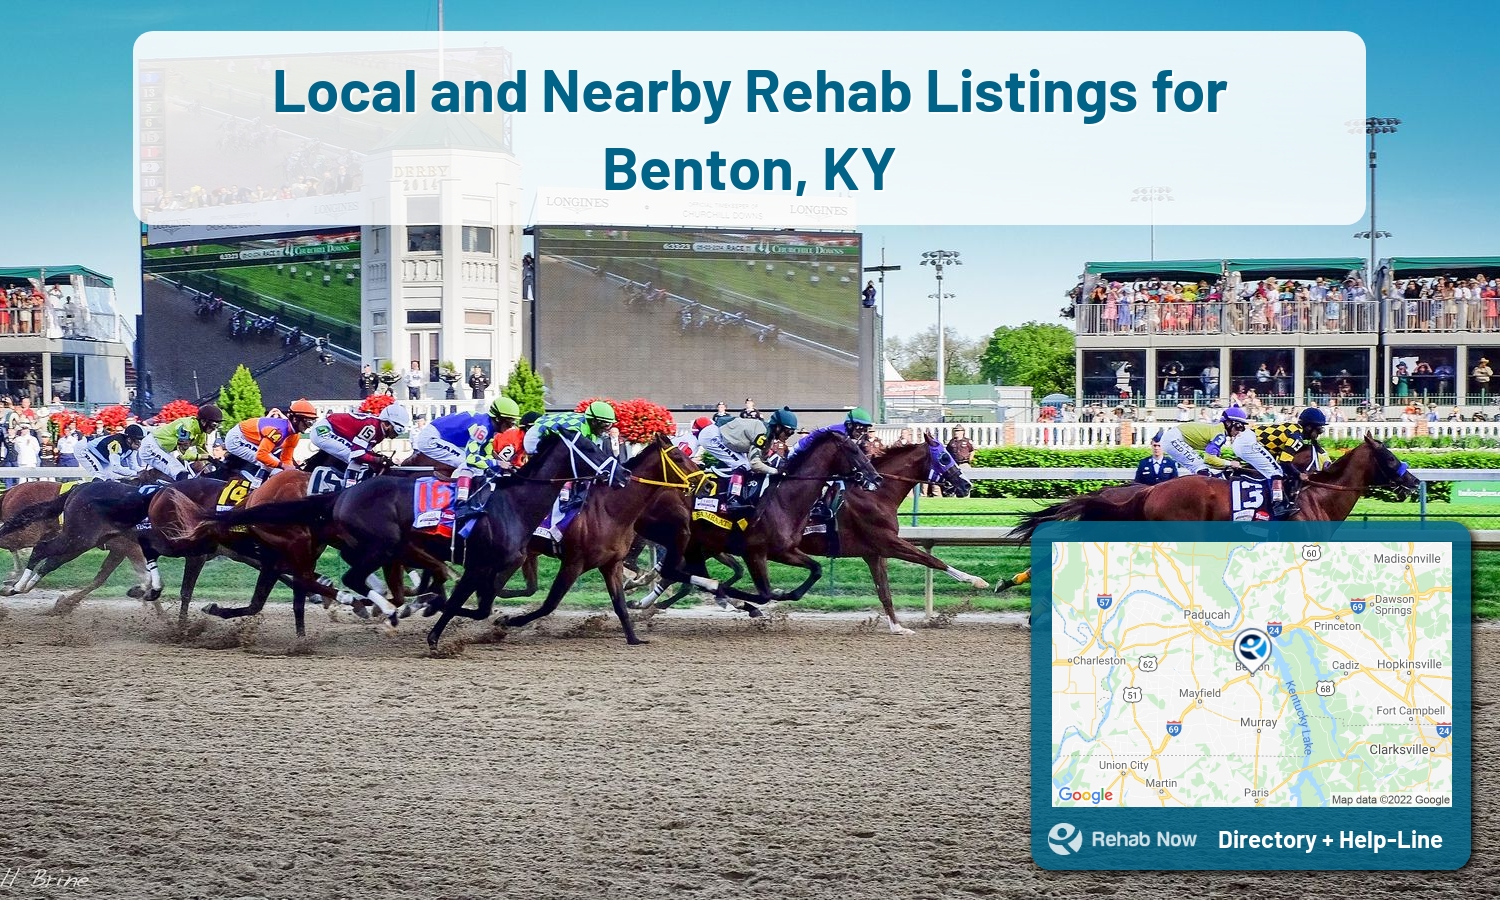 Our experts can help you find treatment now in Benton, Kentucky. We list drug rehab and alcohol centers in Kentucky.